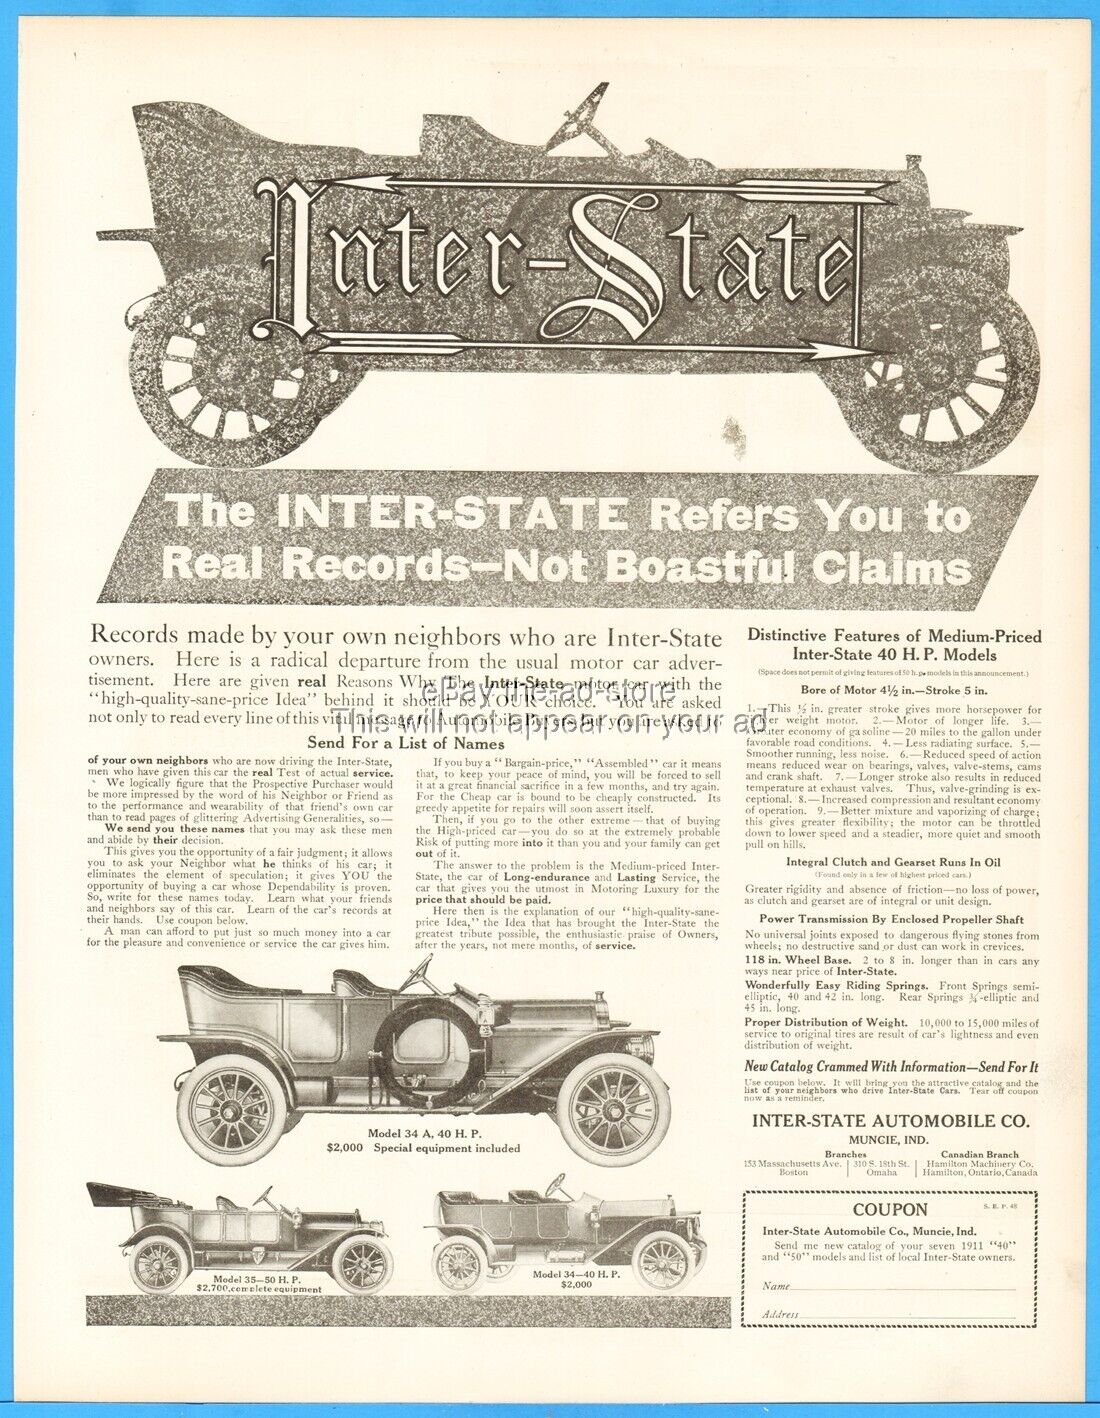 1911 Inter-State Automobile Co Muncie IN Model 34A 35 34 Open Touring Car Ad